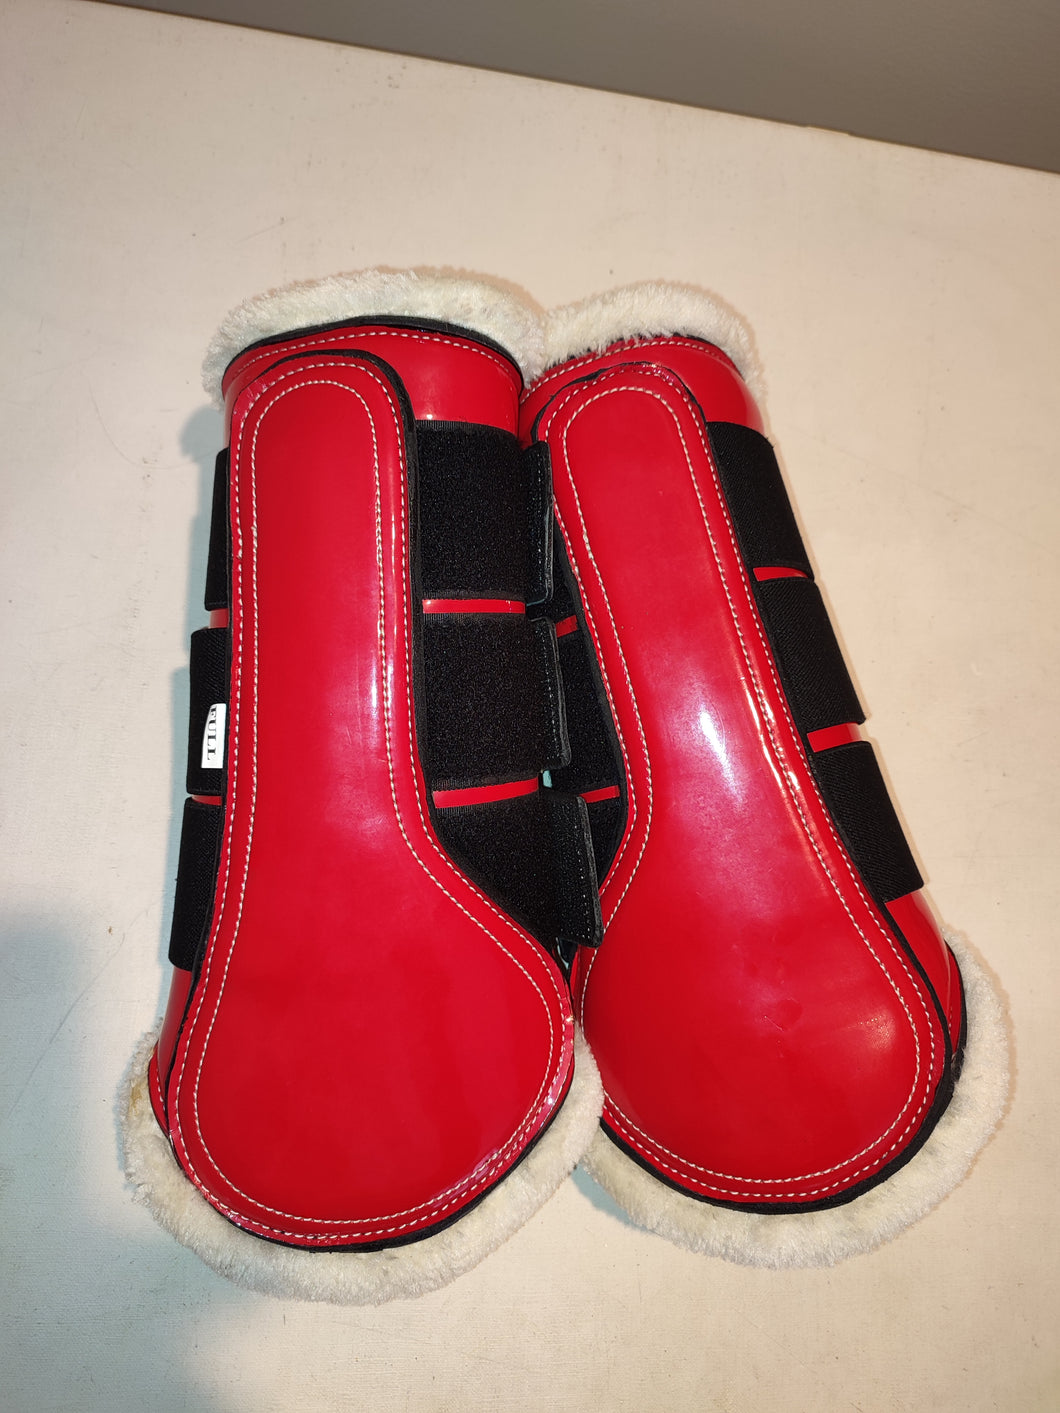 CLEARANCE SALE! Brushing Boots RED White Fleece